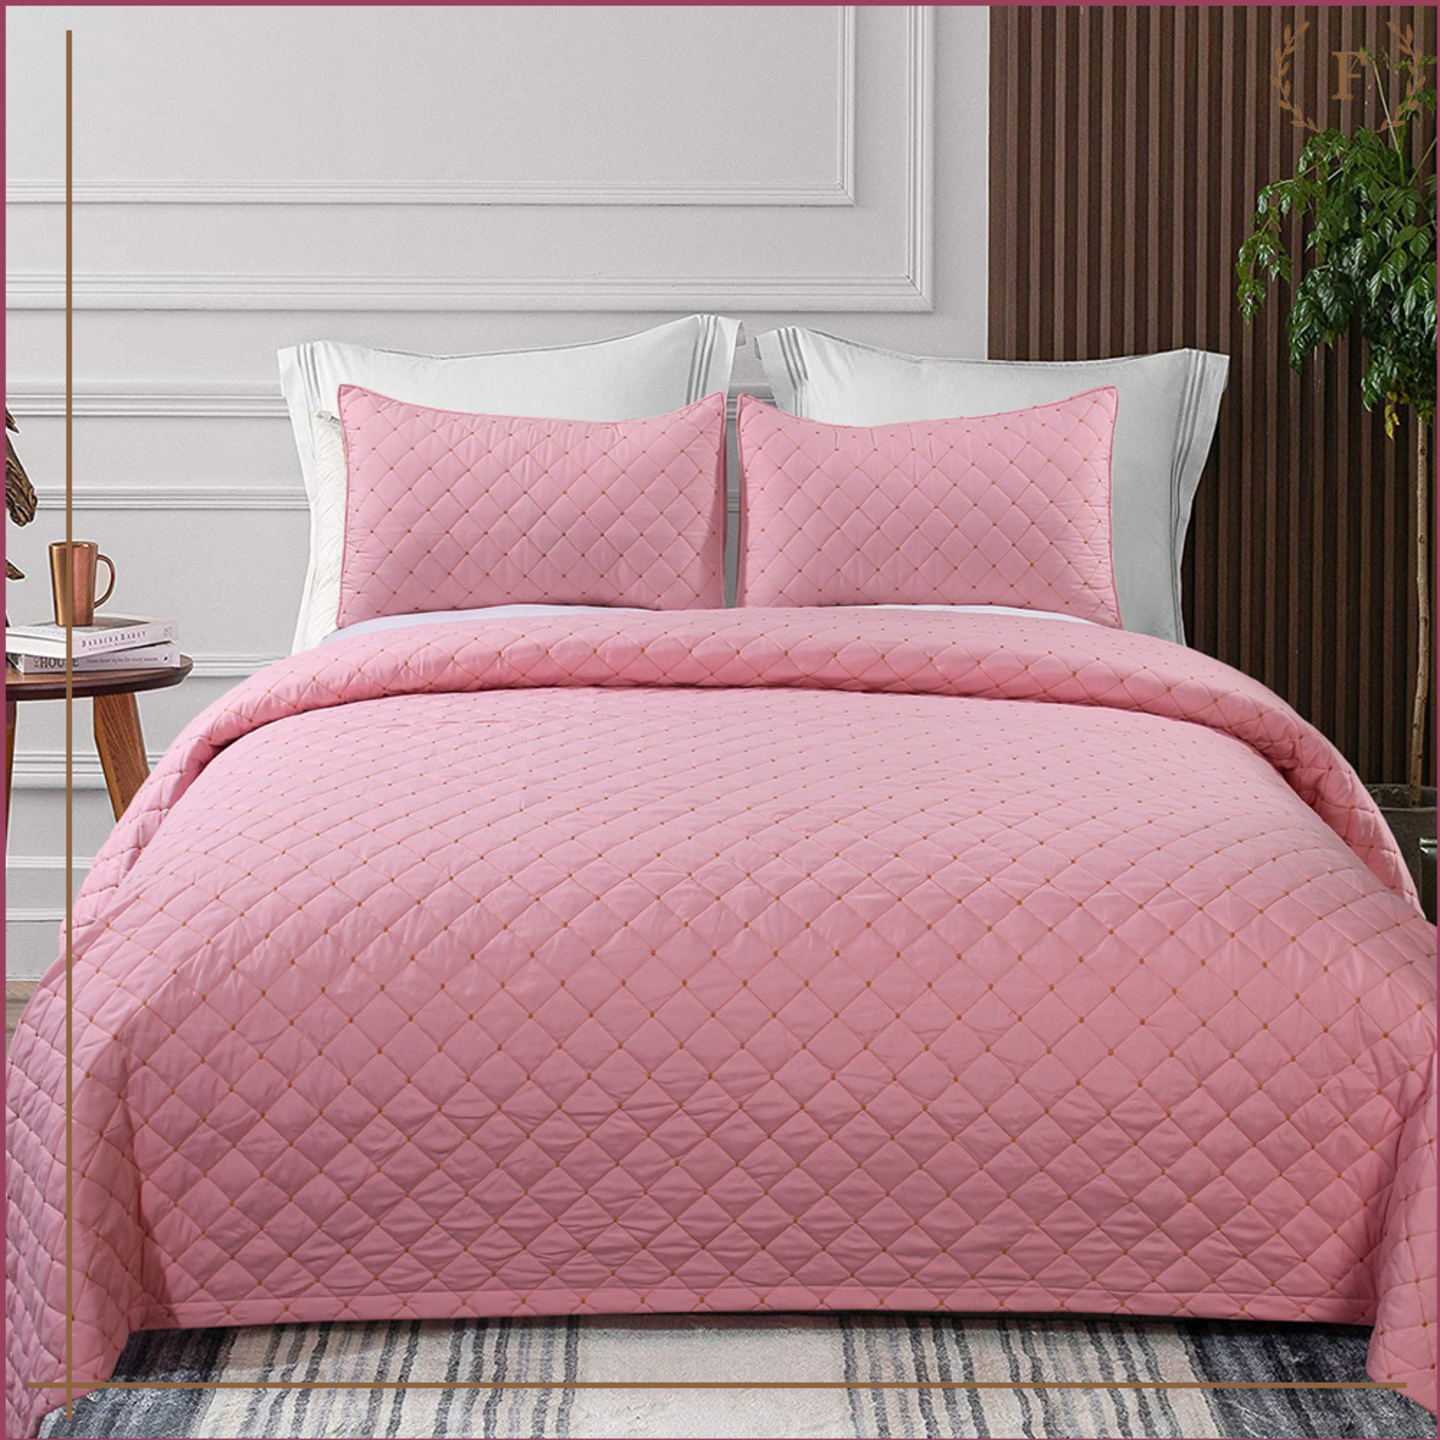 Quilted BedCovers| Soft Micro-Peach|Double Bed BedCovers